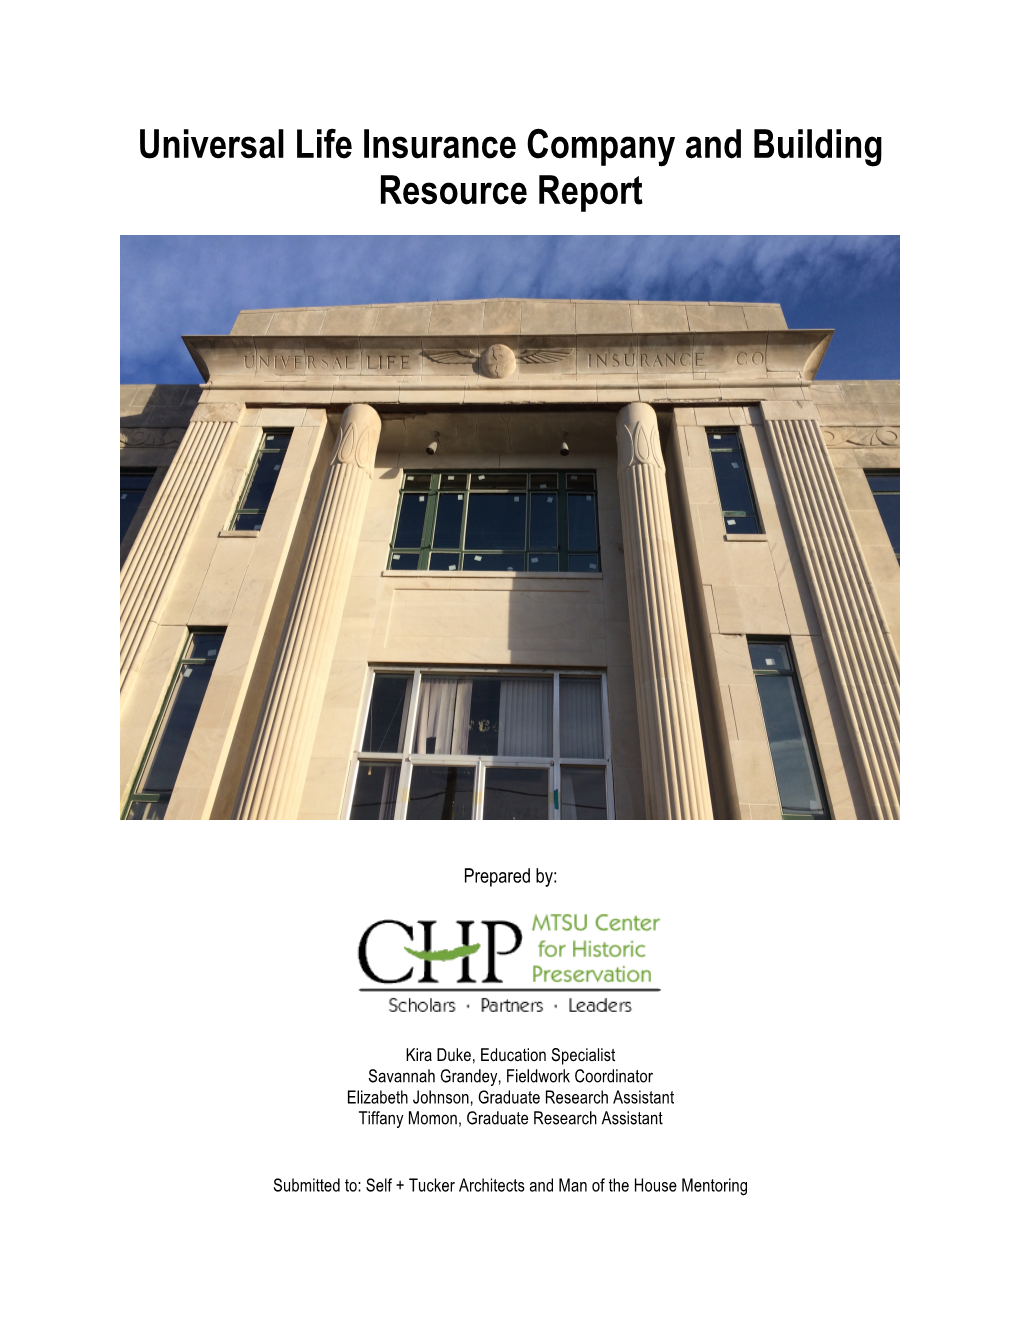 Universal Life Insurance Company and Building Resource Report